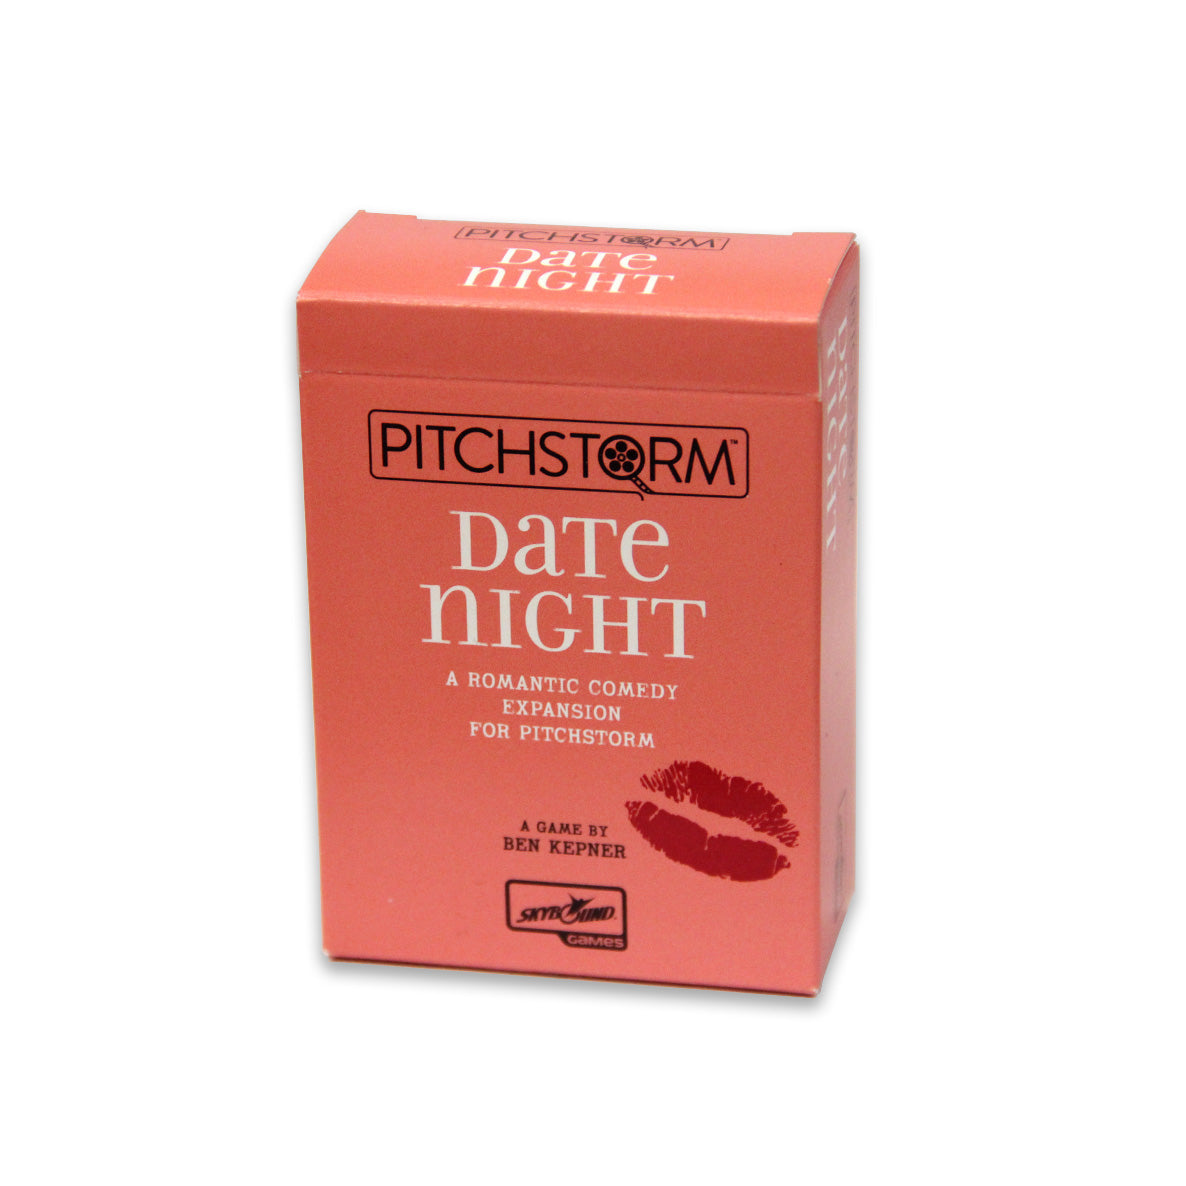 PITCHSTORM Date Night: A Romantic Comedy Expansion